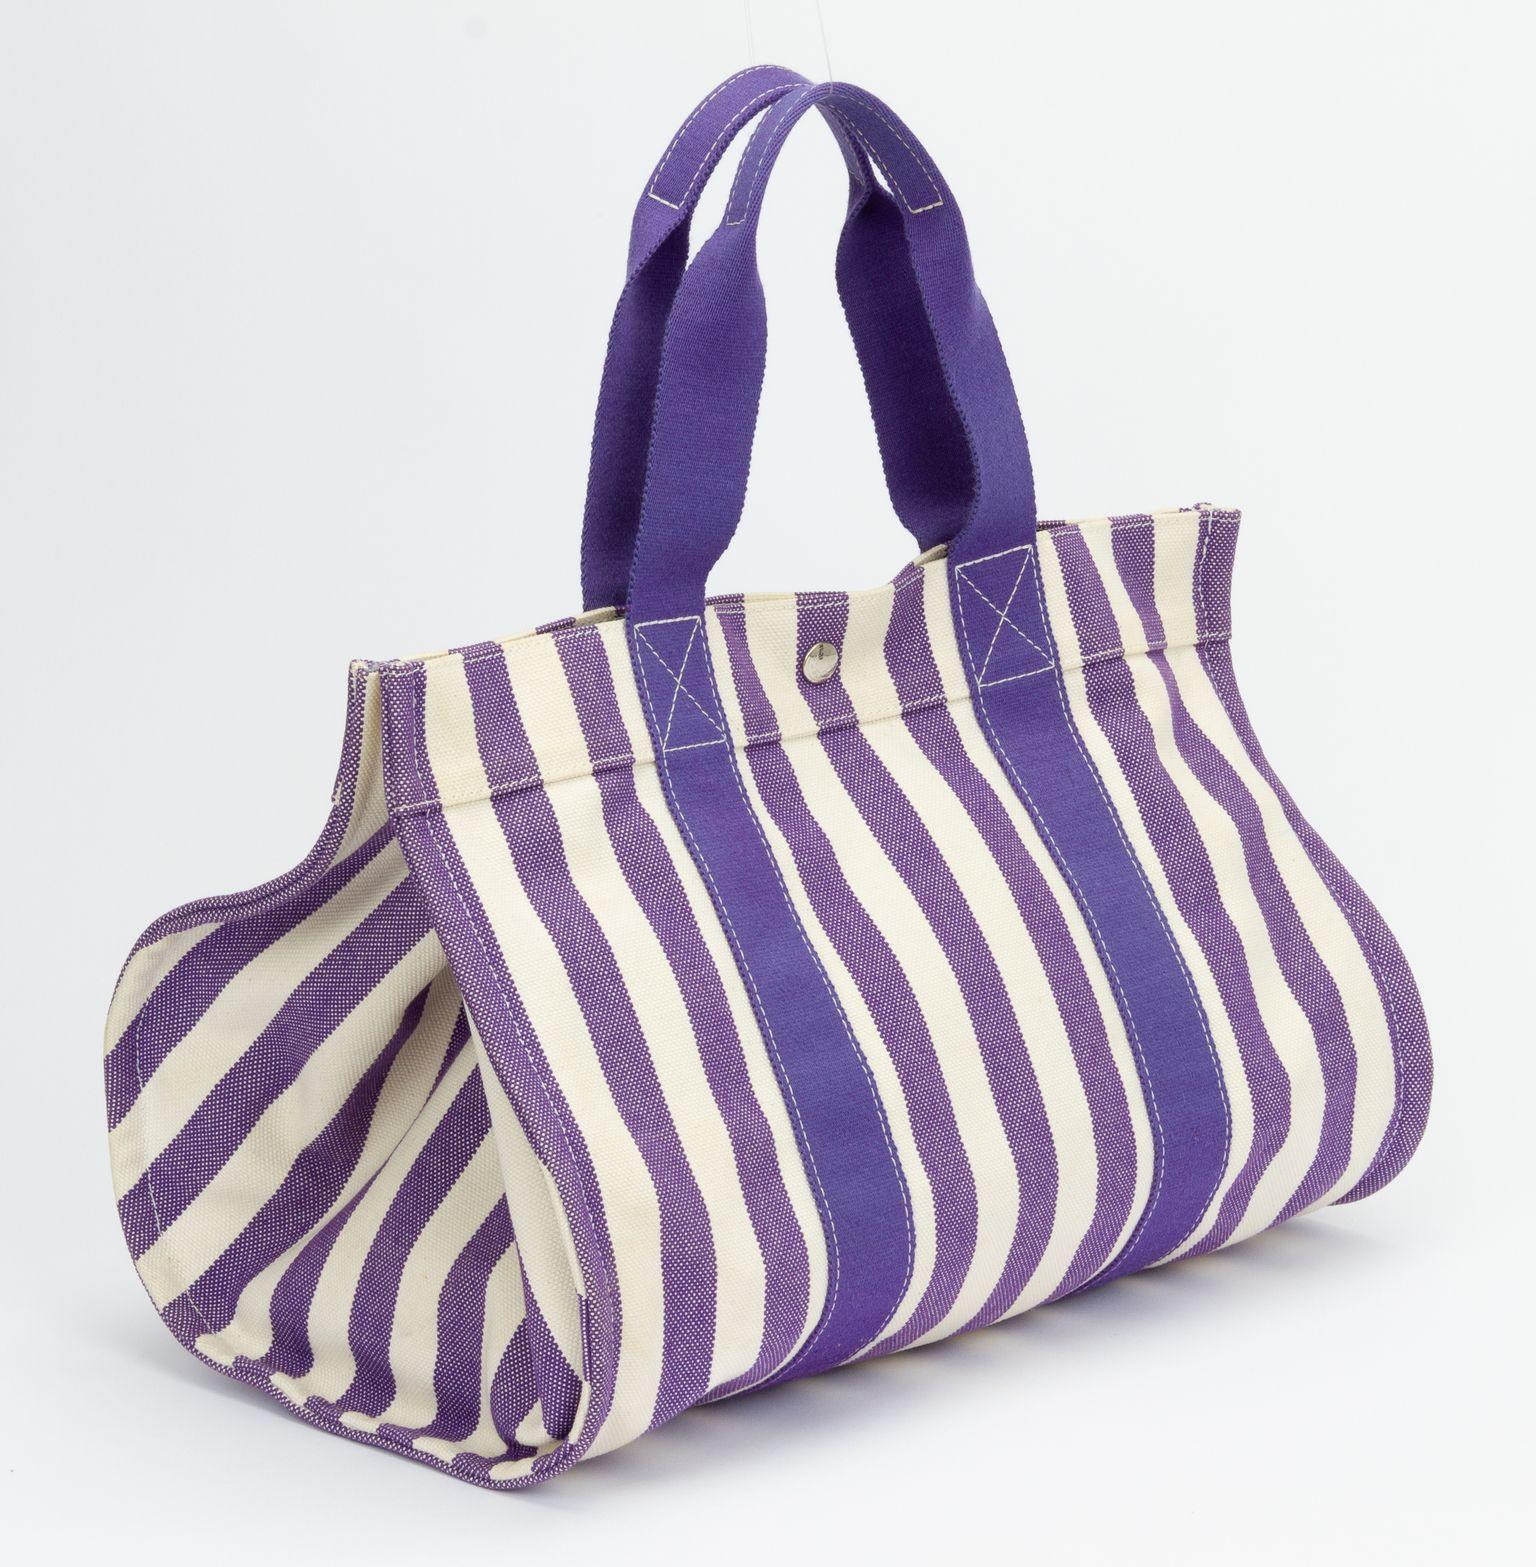 Hermès large striped beach bag in toile , purple and white. Includes a fabric pouch (L 8.75